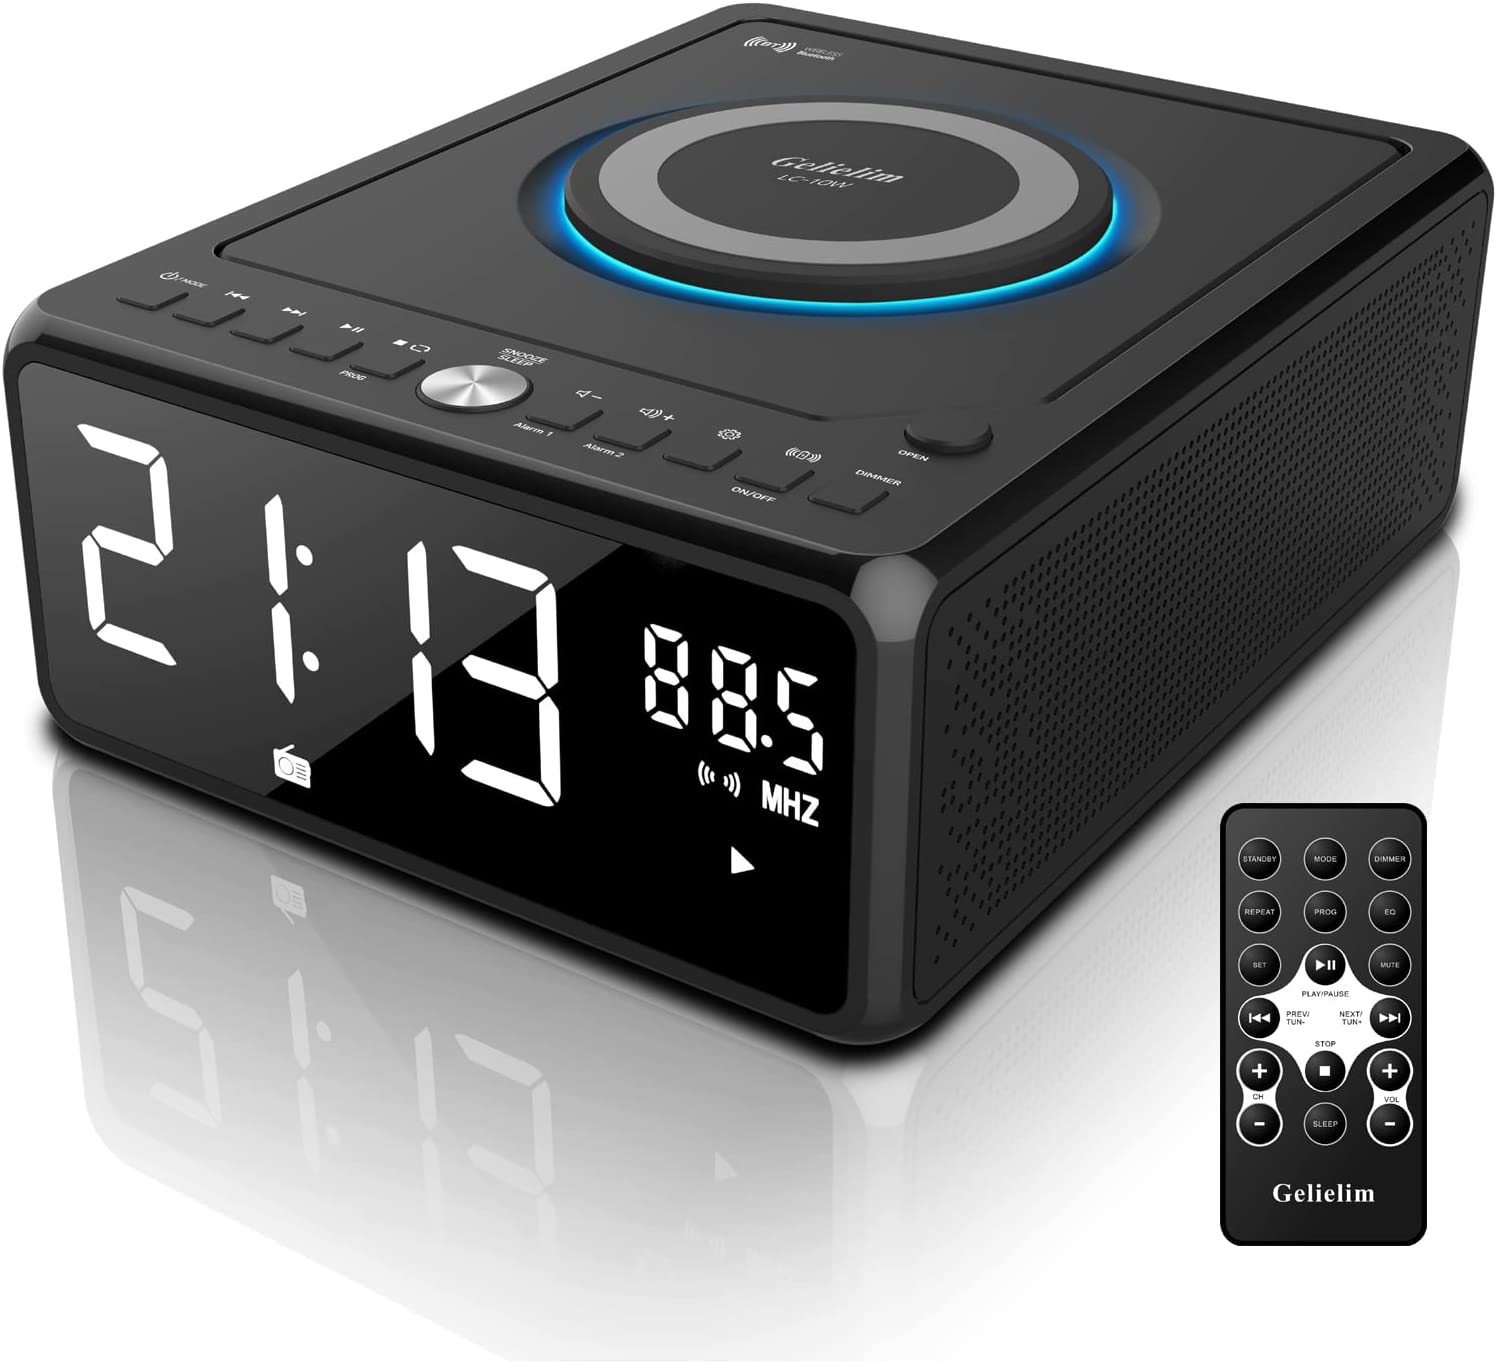 Gelielim CD Clock Radio, CD Player Boombox with Remote, Dual Alarm Clock with Wireless Charging, Clock Radios with Bluetooth for Bedroom, Sleep & Snooze, MP3/USB Music Player, Dimmable LED Display